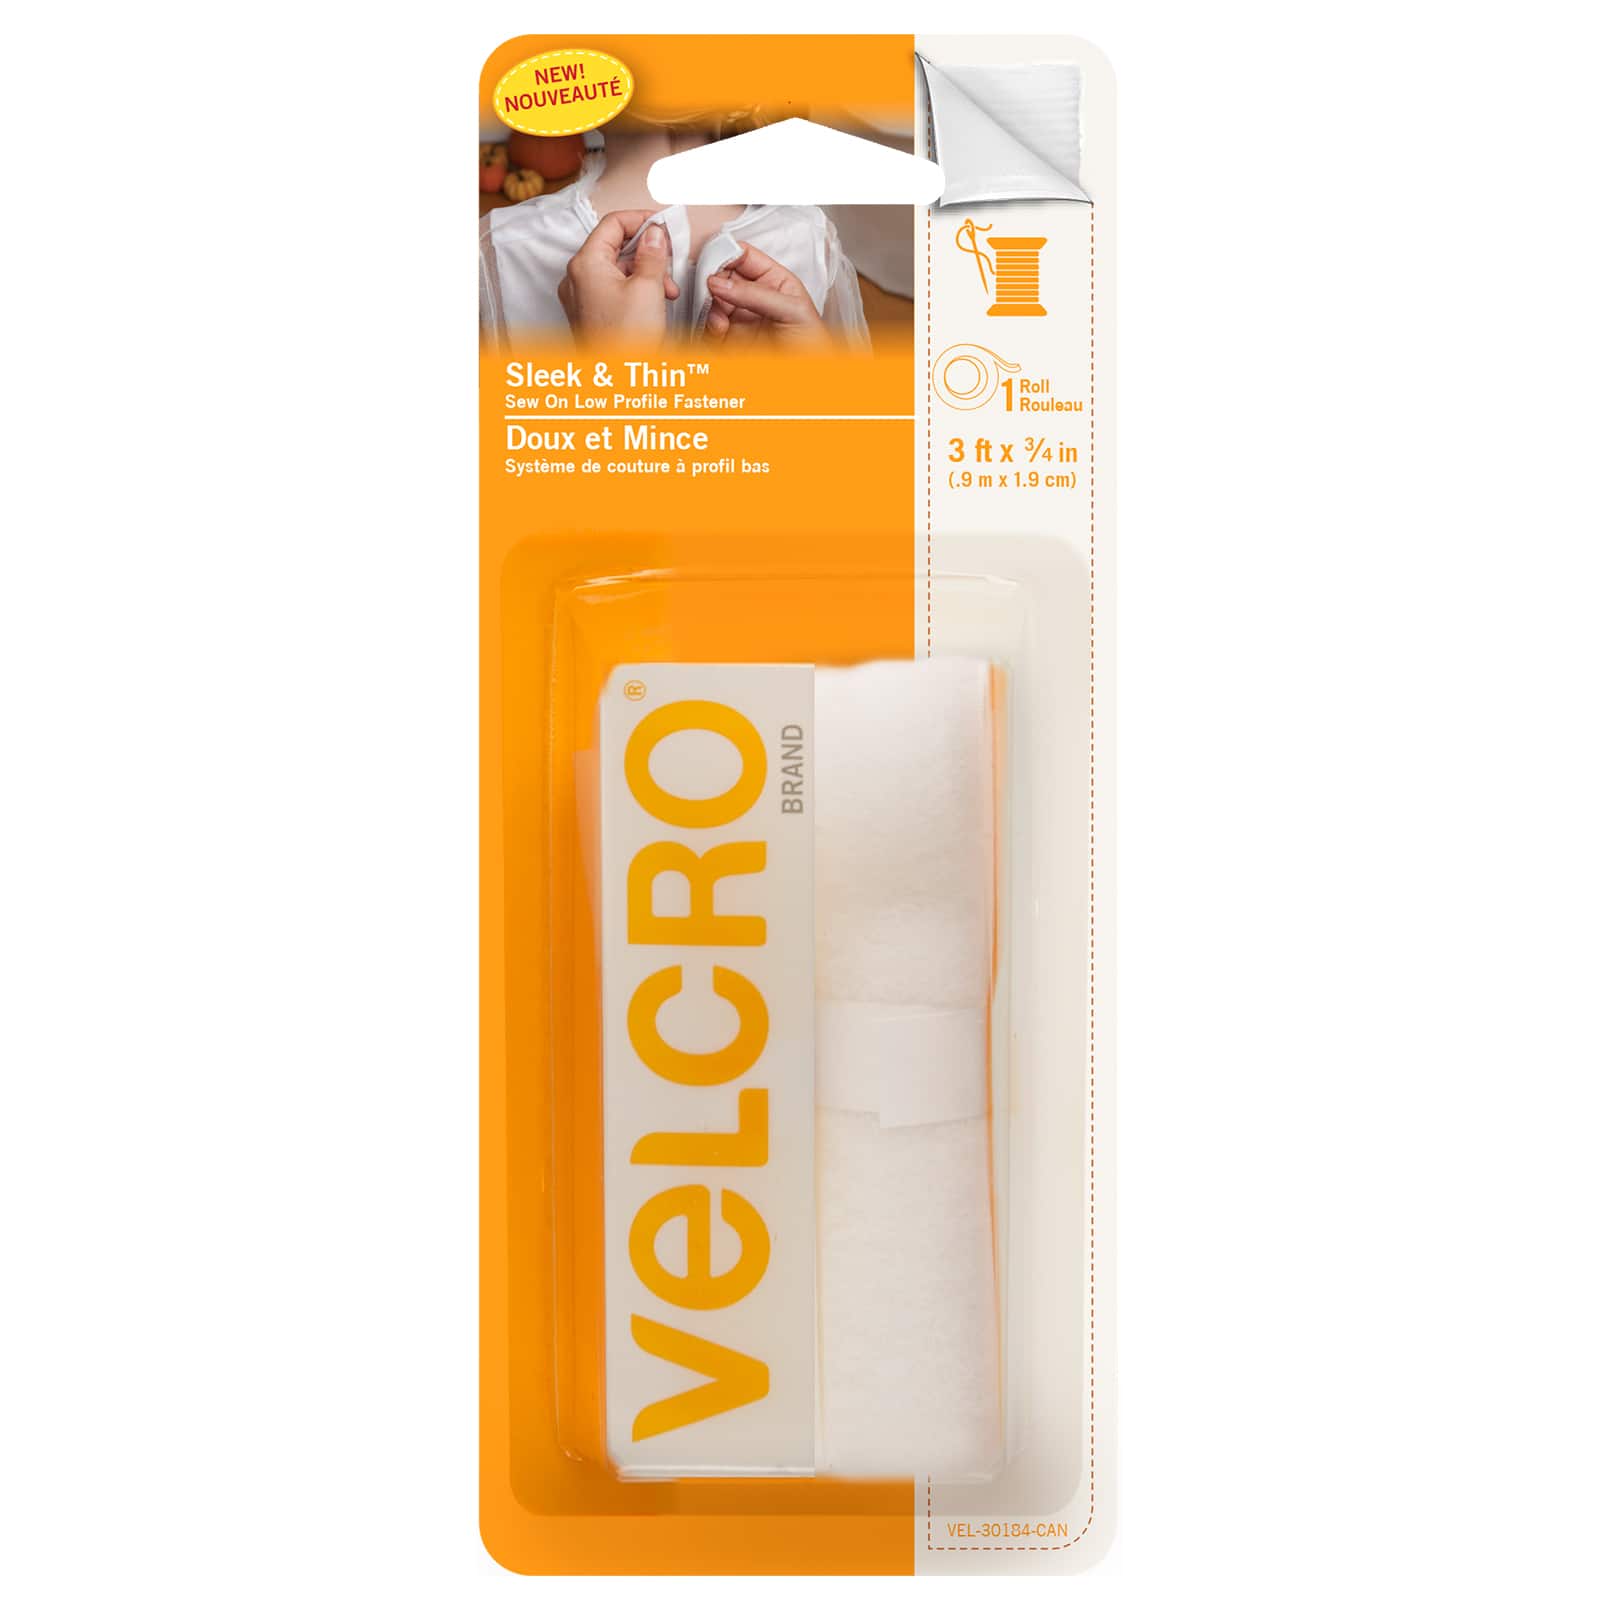 Sew On Velcro Roll White – Wee Scotty